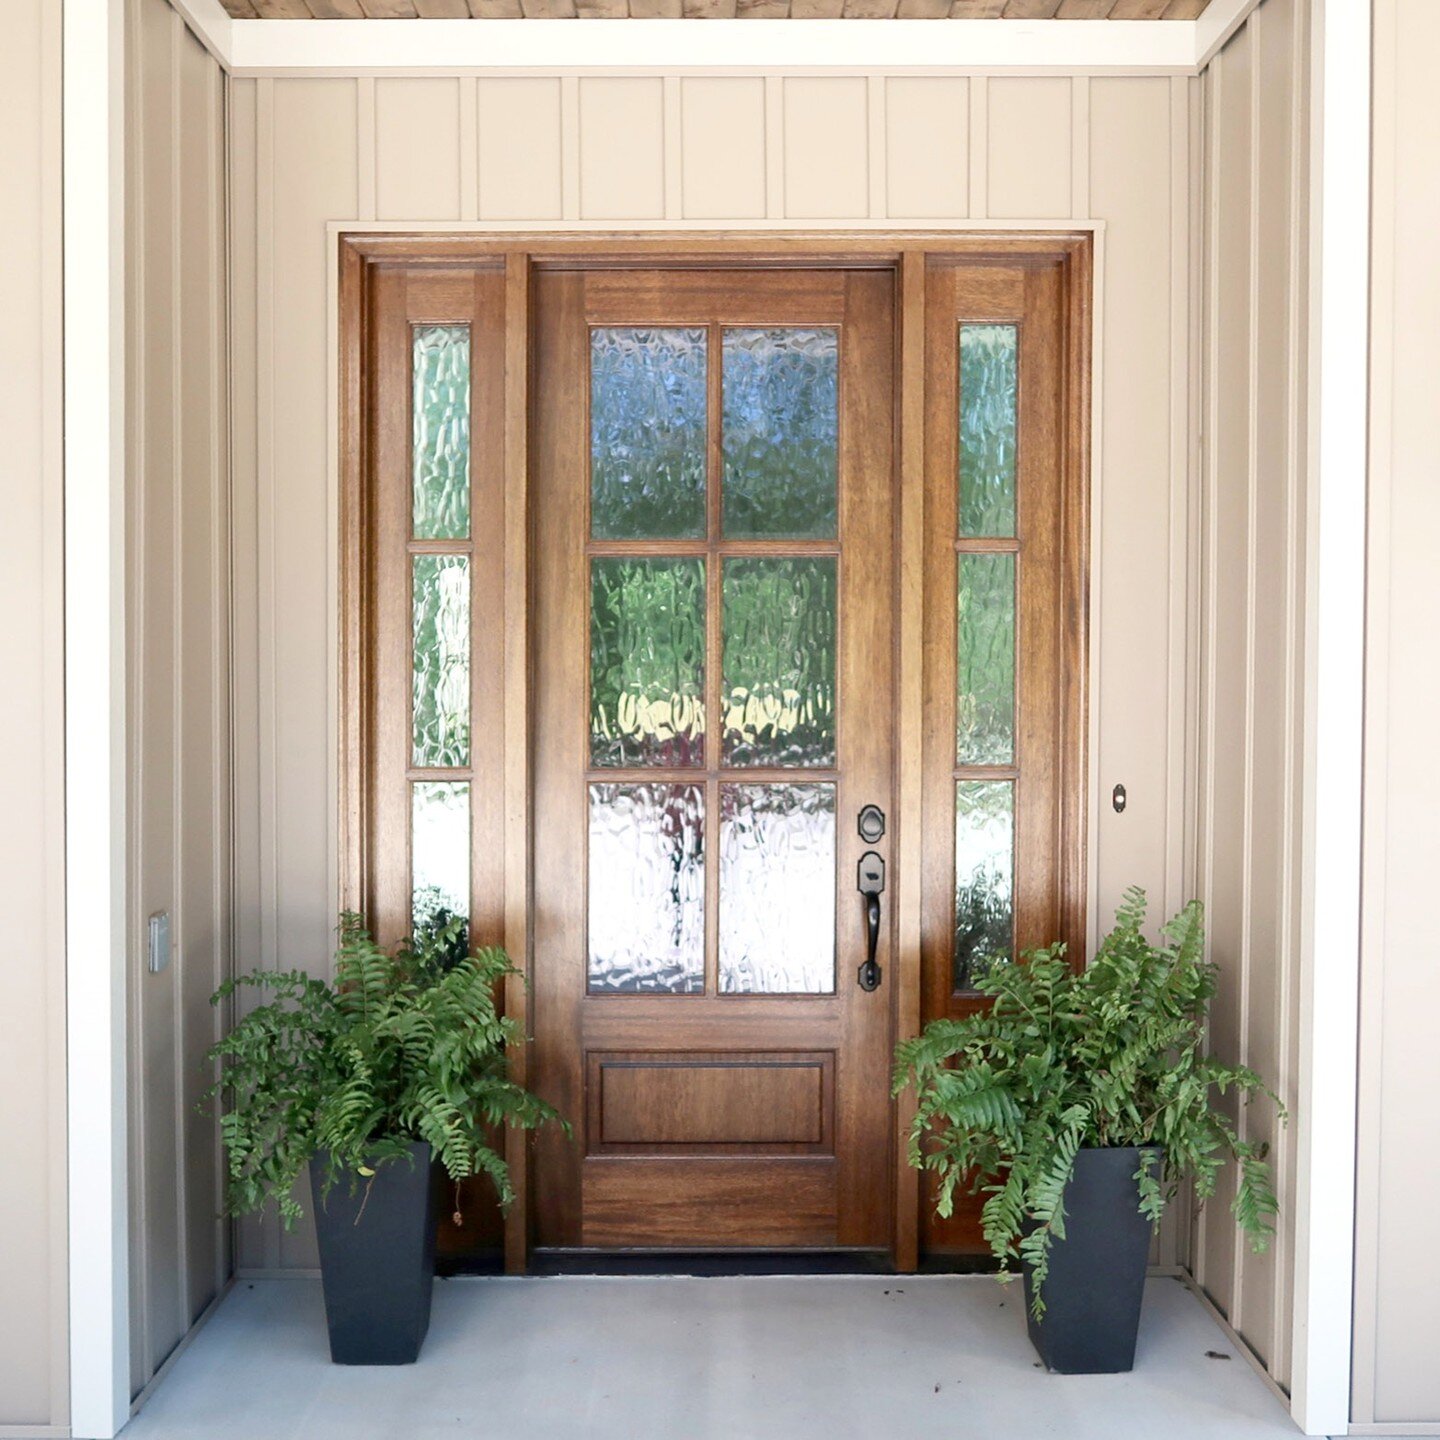 Traditional wood entry door by Simpson Doors. Find the perfect front door for your home! 

*
*
*
#simpsondoor #simpsondoors #windowanddoors #doors #entrydoor #exteriordoors #exteriordesign #traditionaldesign #homerenovation #homeremodel #traditionala